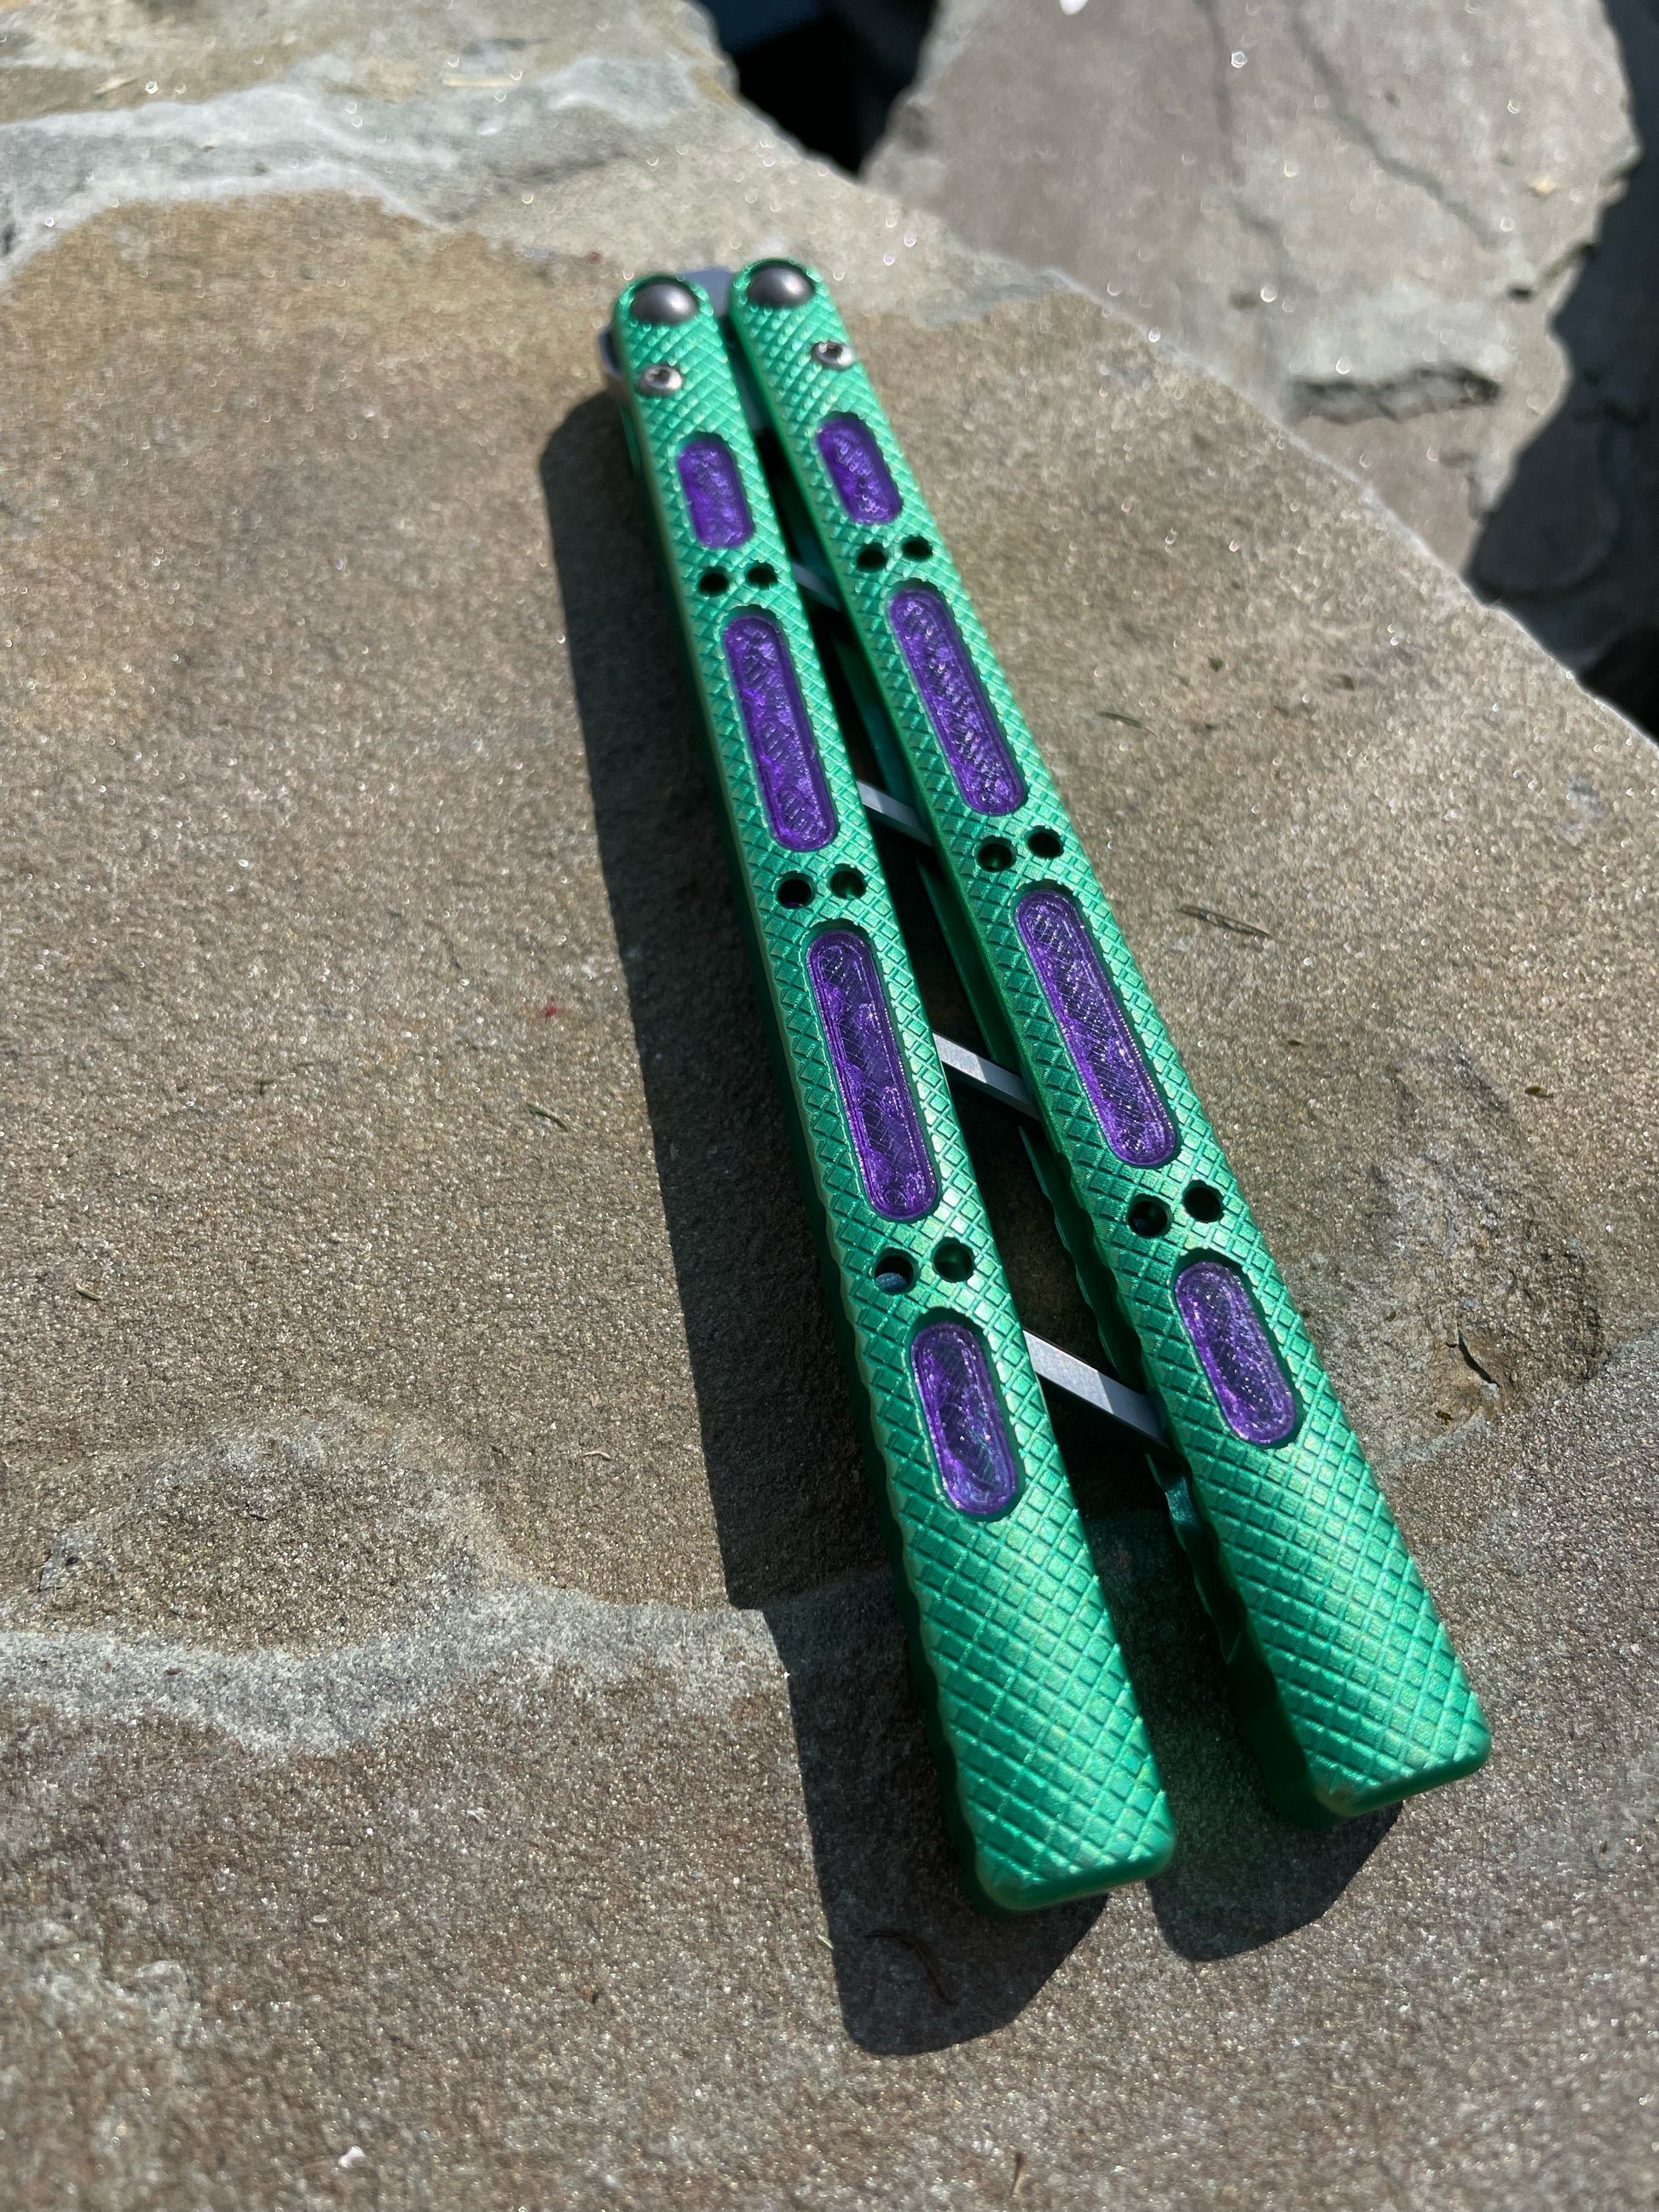 Modify the grip of your NRB Concepts SLight balisong and NRB UltraLight balisong trainer with Zippy handle inlays.